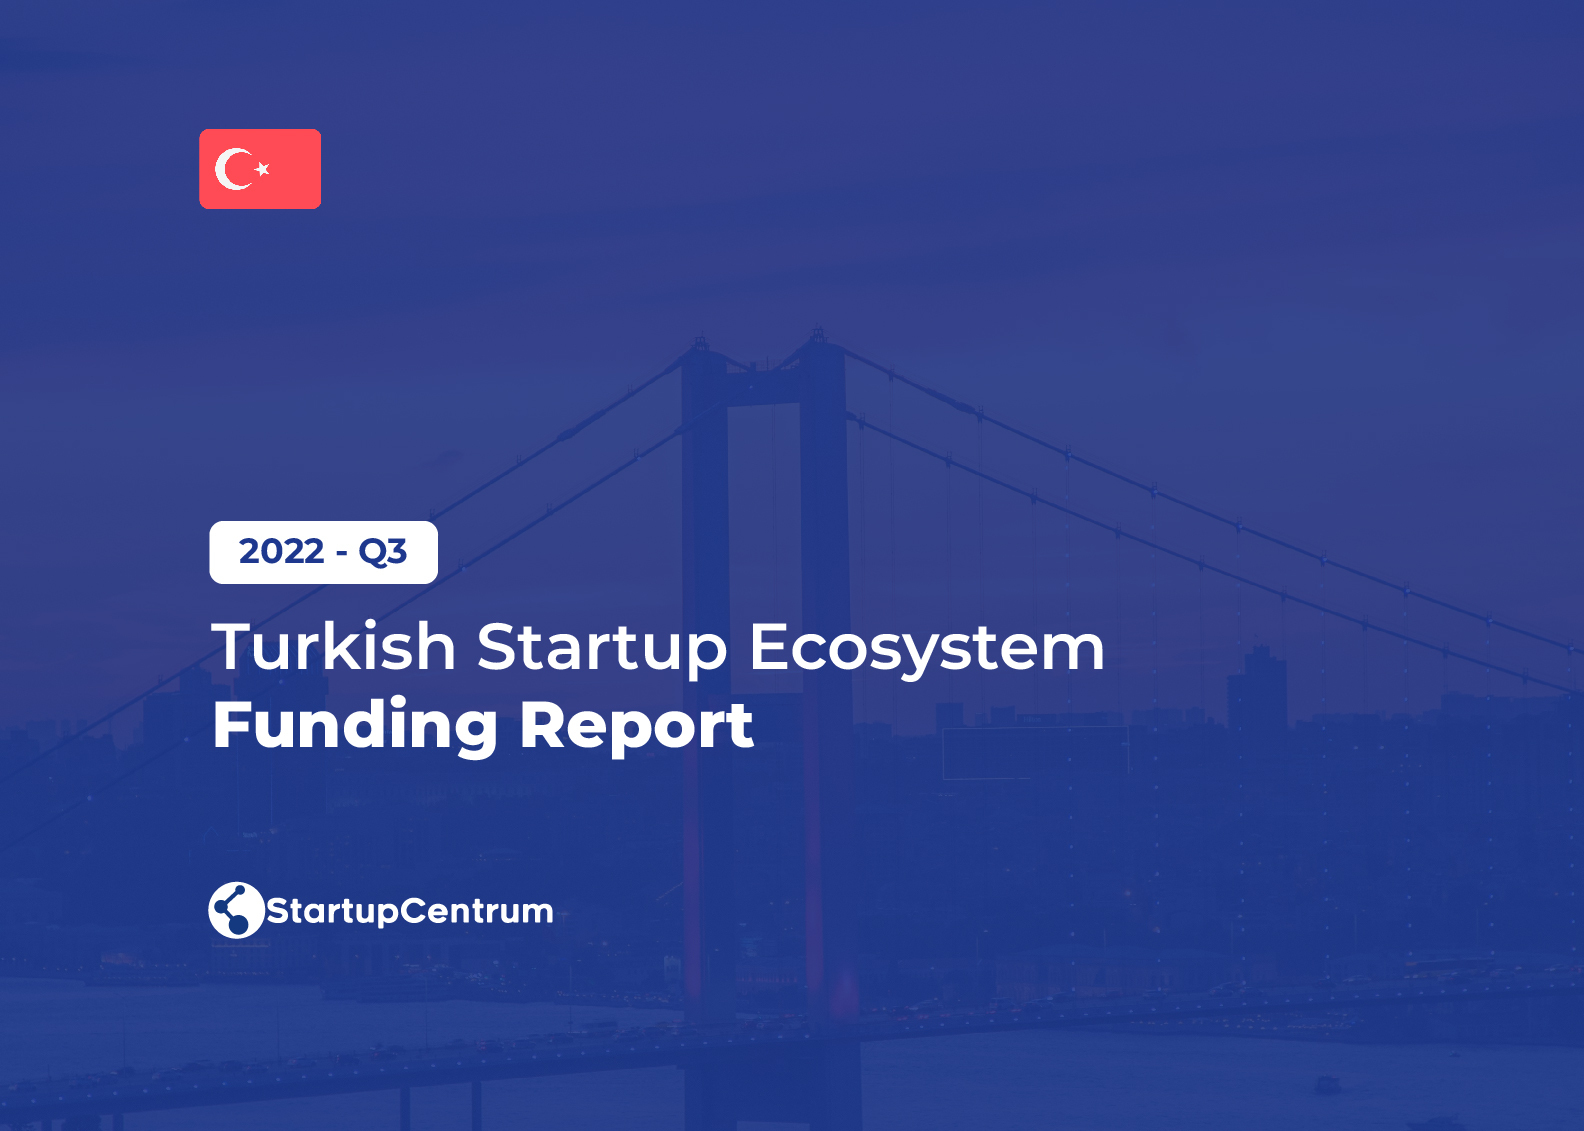 2022 - Q3 Turkish Startup Ecosystem Funding Report Cover Image